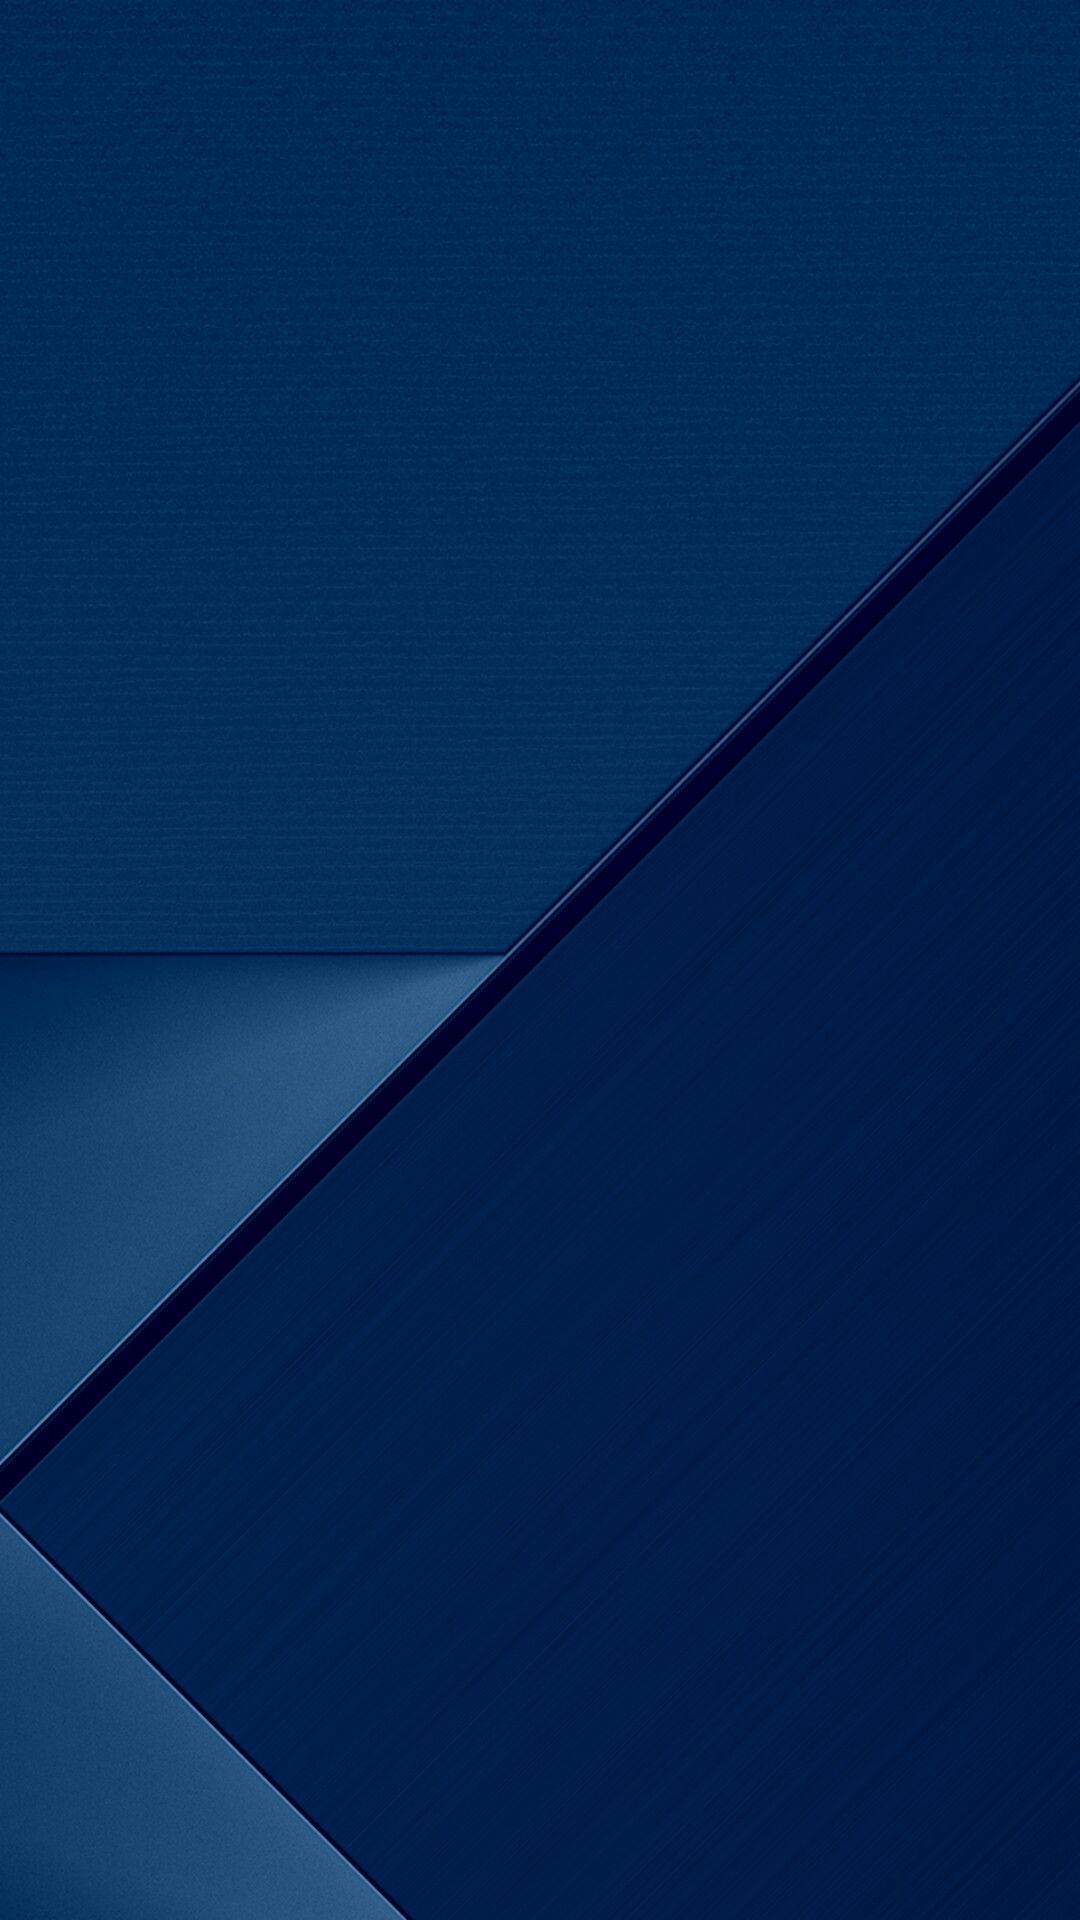 Blue Geometric Abstract Wallpaper. Abstract wallpaper, Geometric abstract wallpaper, Cellphone wallpaper